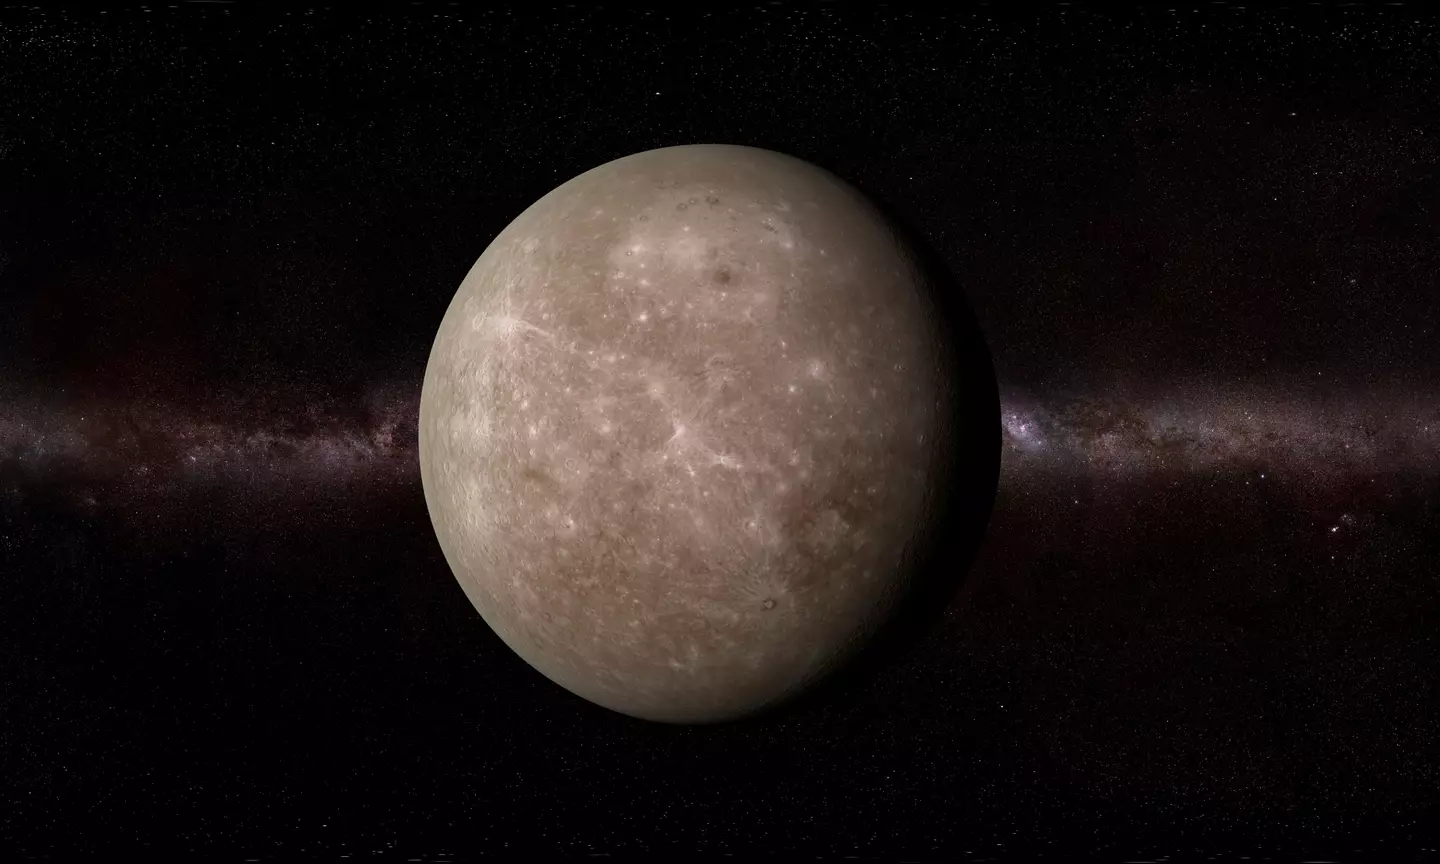 Kepler-442b has been given a habitability rating of 0.836 compared to Earth's 0.829. (Getty Stock Image)